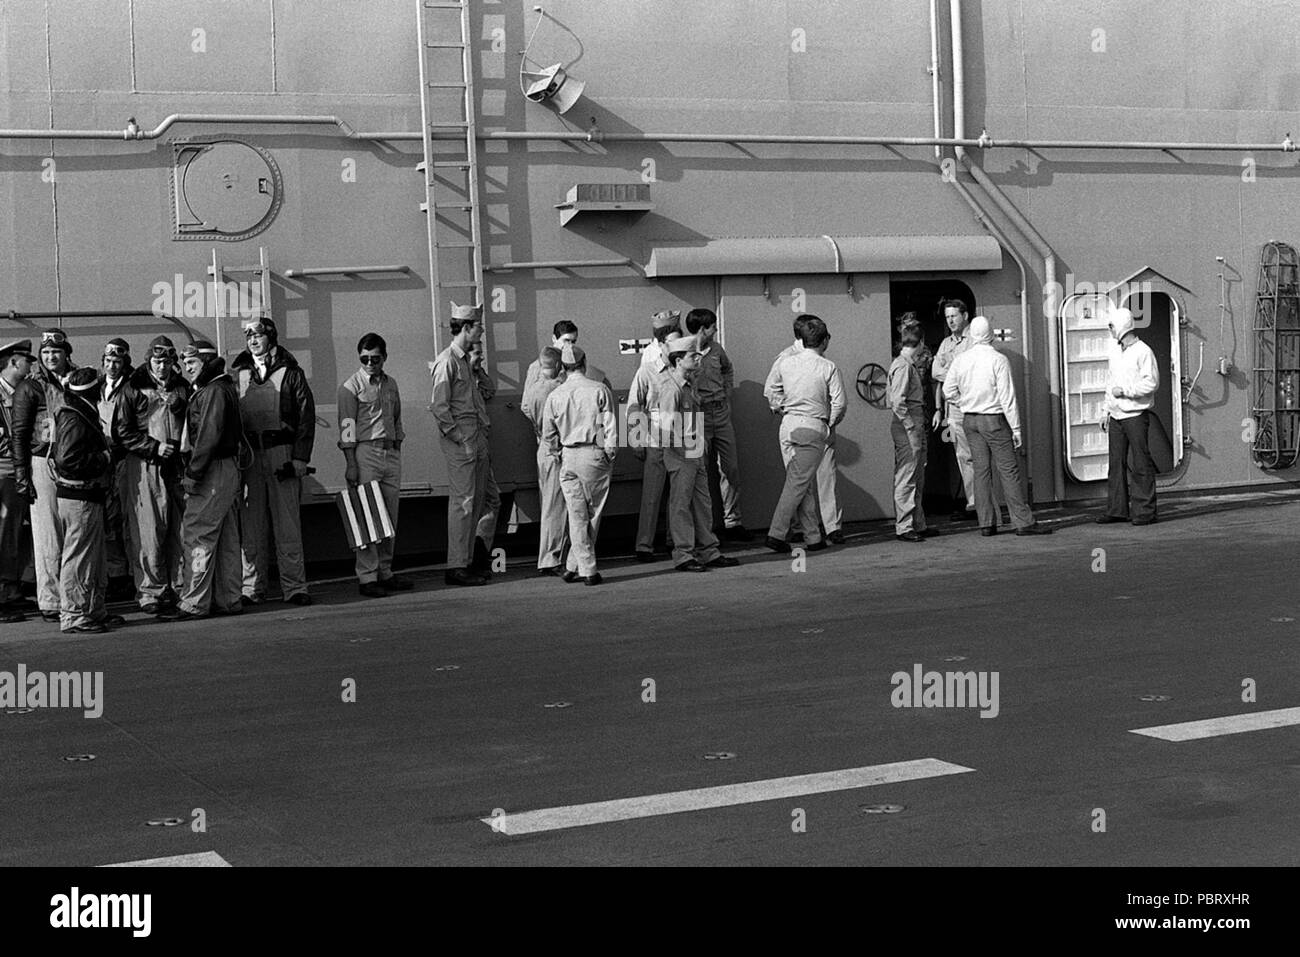 Actors during The Winds of War TV series filming aboard USS Peleliu (LHA-5) 1981. Actors from Paramount Studios and crewmen from the amphibious assault ship USS PELELIU (LHA 5) are outfitted in World War II uniforms during the filming of the movie 'Winds of War'. Stock Photo